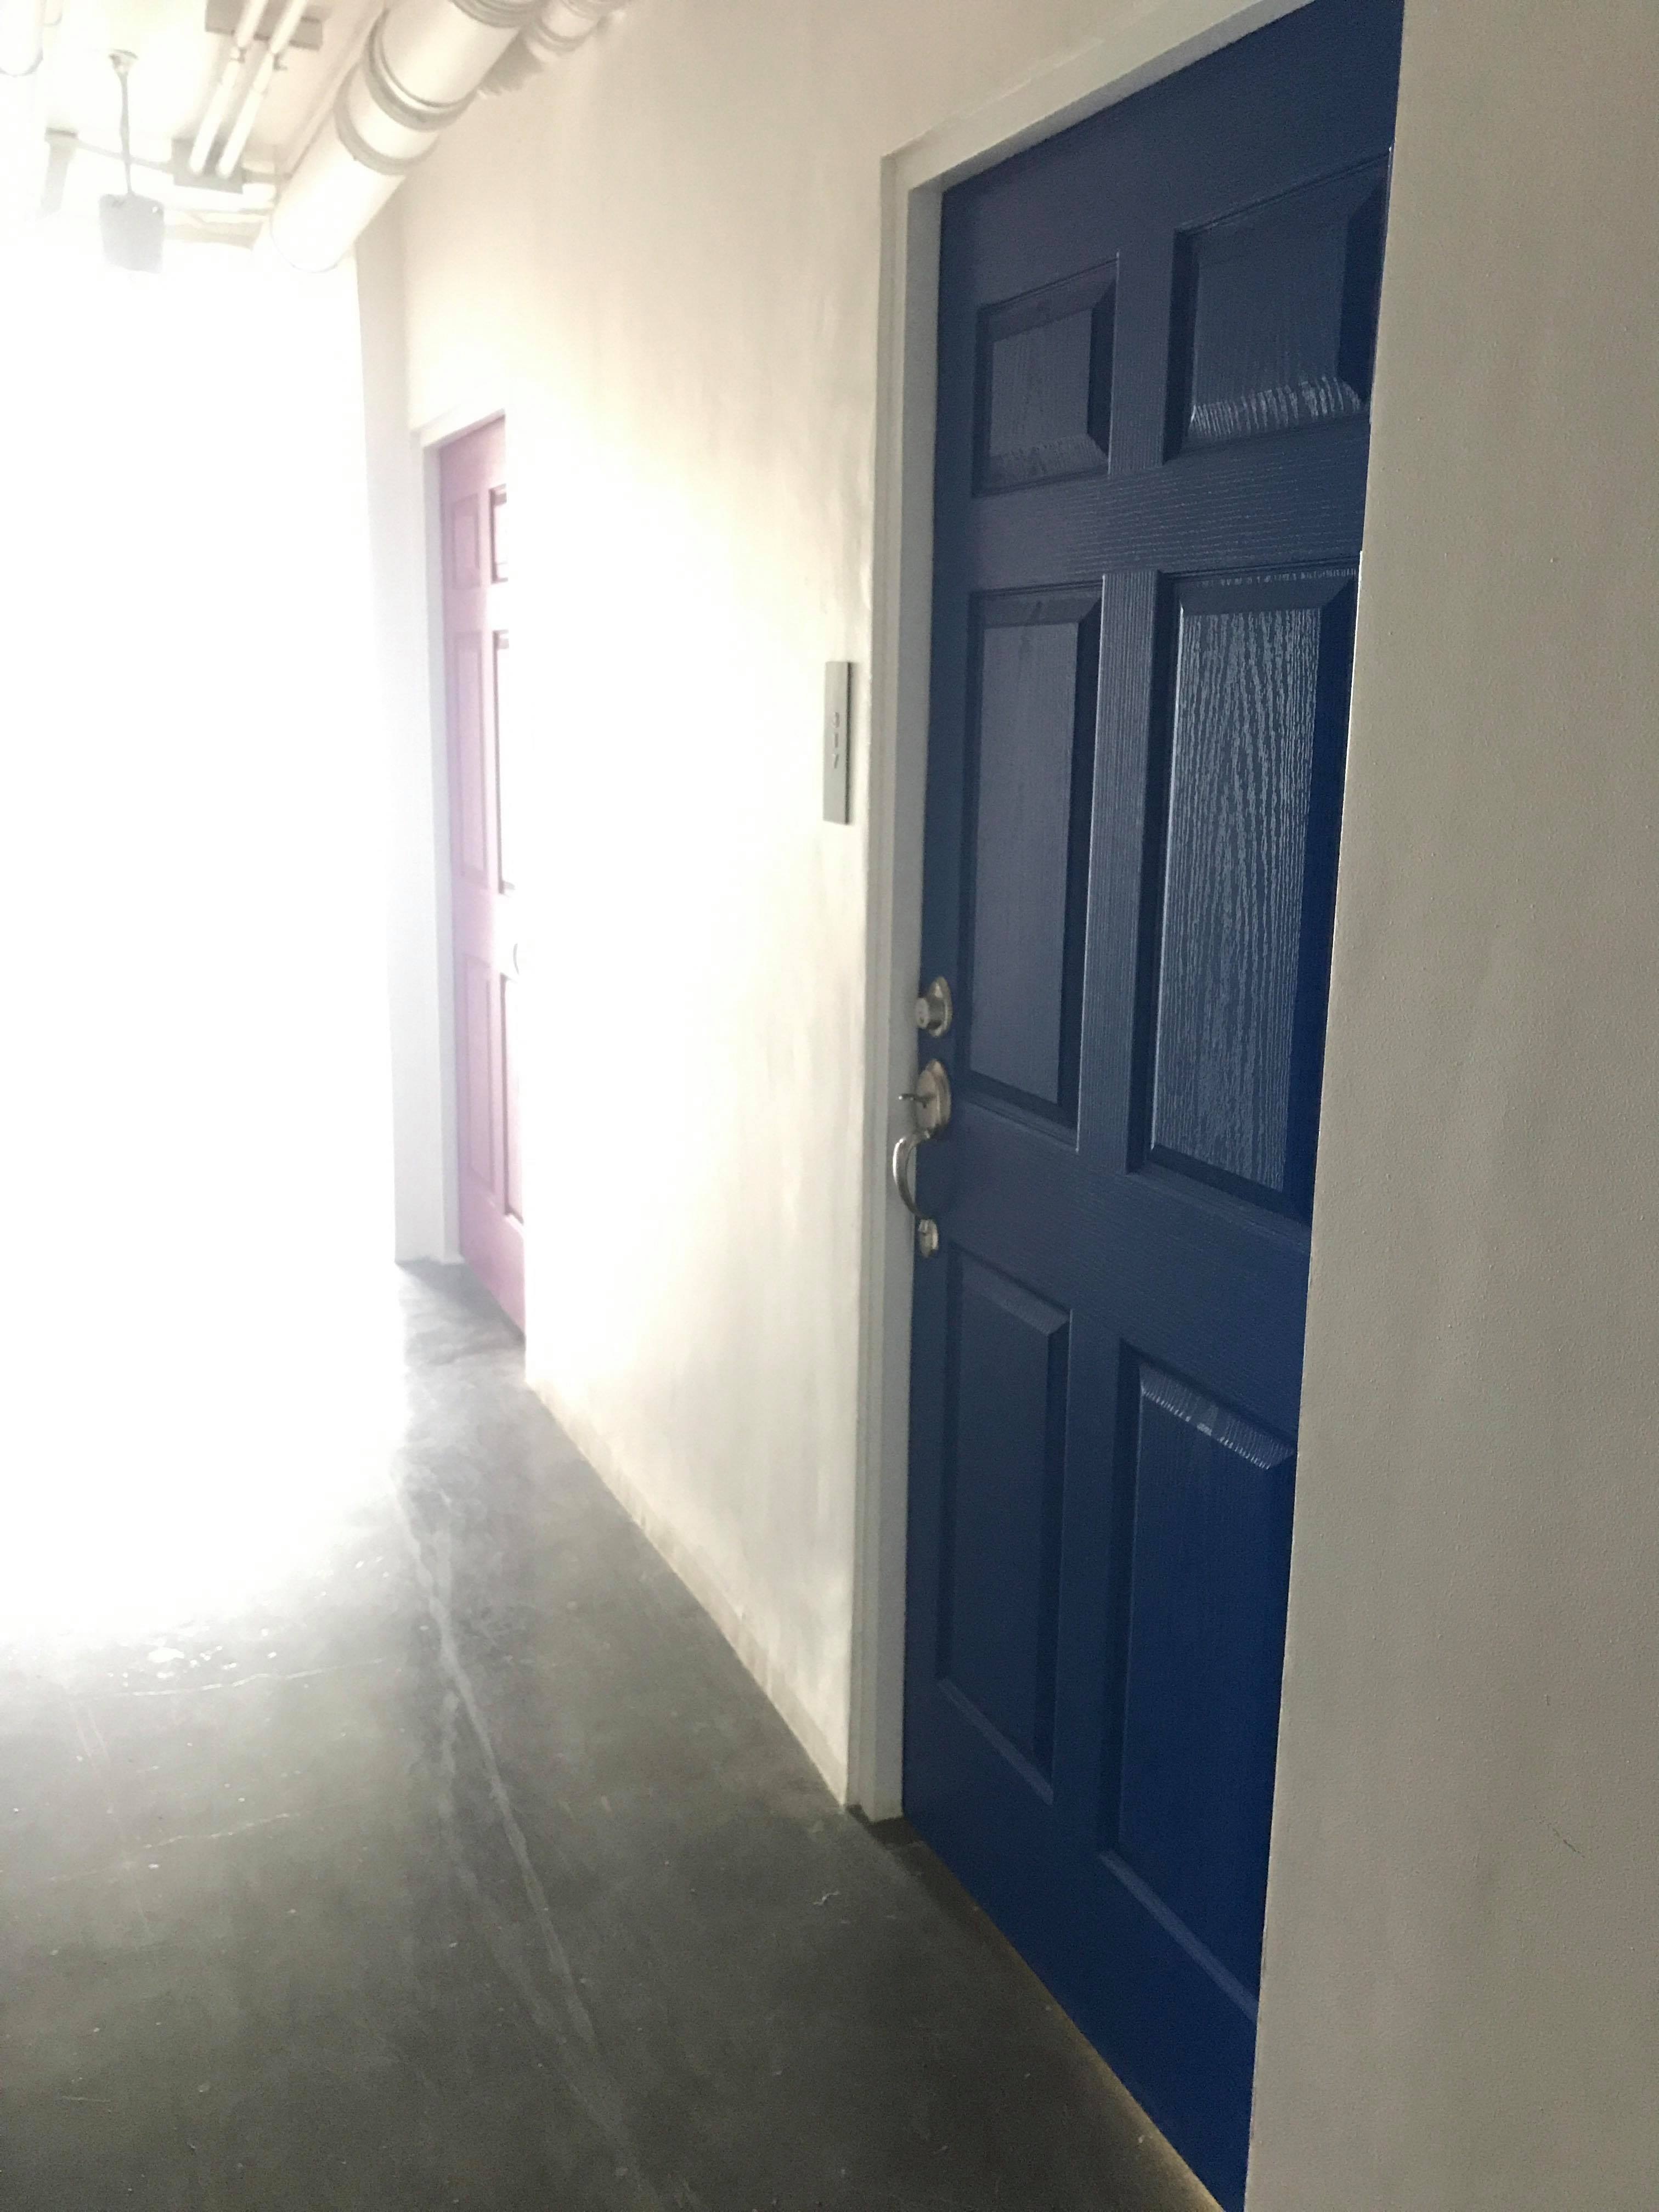 Let Our Year 2018 Burst With Colors. Let's Start with Our Doors.